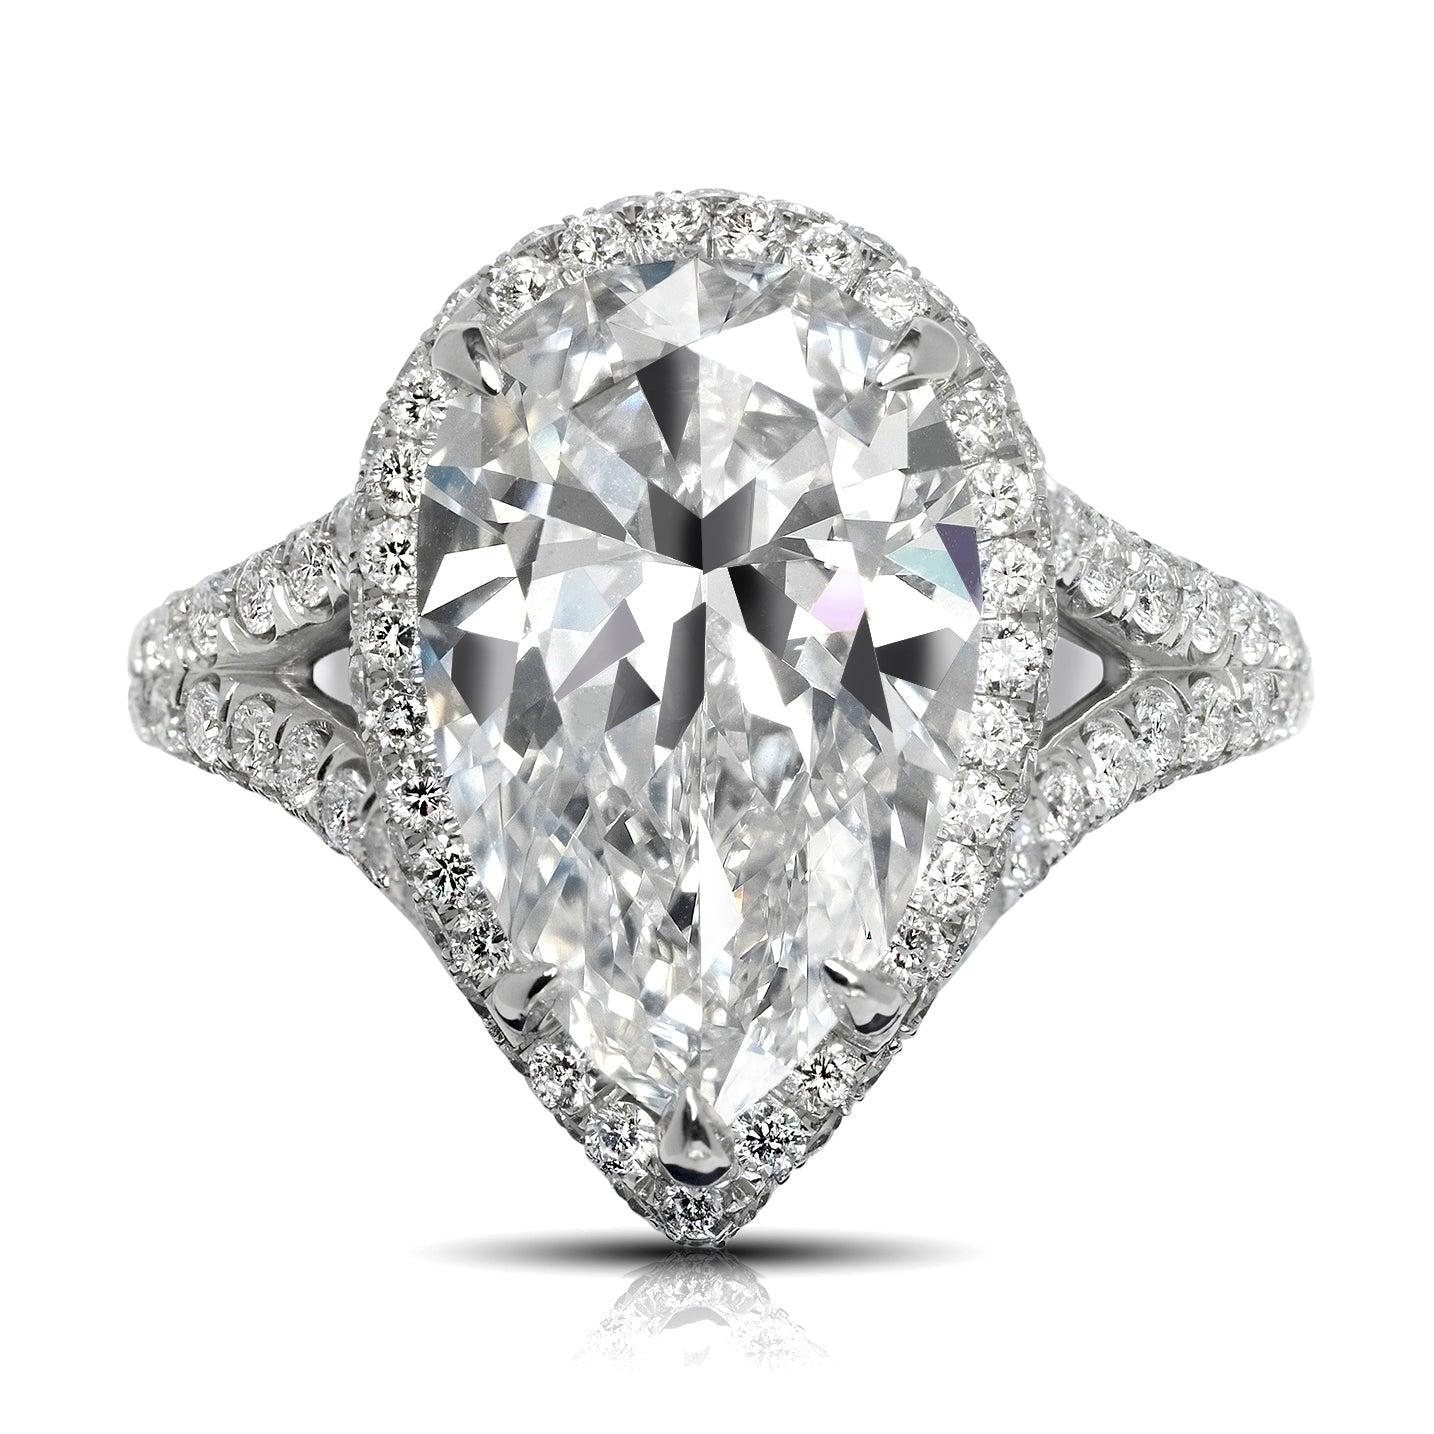 NATALIE 5 CARAT PEAR DIAMOND ENGAGEMENT PLATINUM RING BY MIKE NEKTA

Center Diamond:
Carat Weight: 5 Carats
Color: E*
Clarity: INTERNALLY FLAWLESS -IF
Style:  PEAR SHAPE
Approximate Measurements: 14.8 x 9.5 x 5.8 mm
* This diamond has been treated